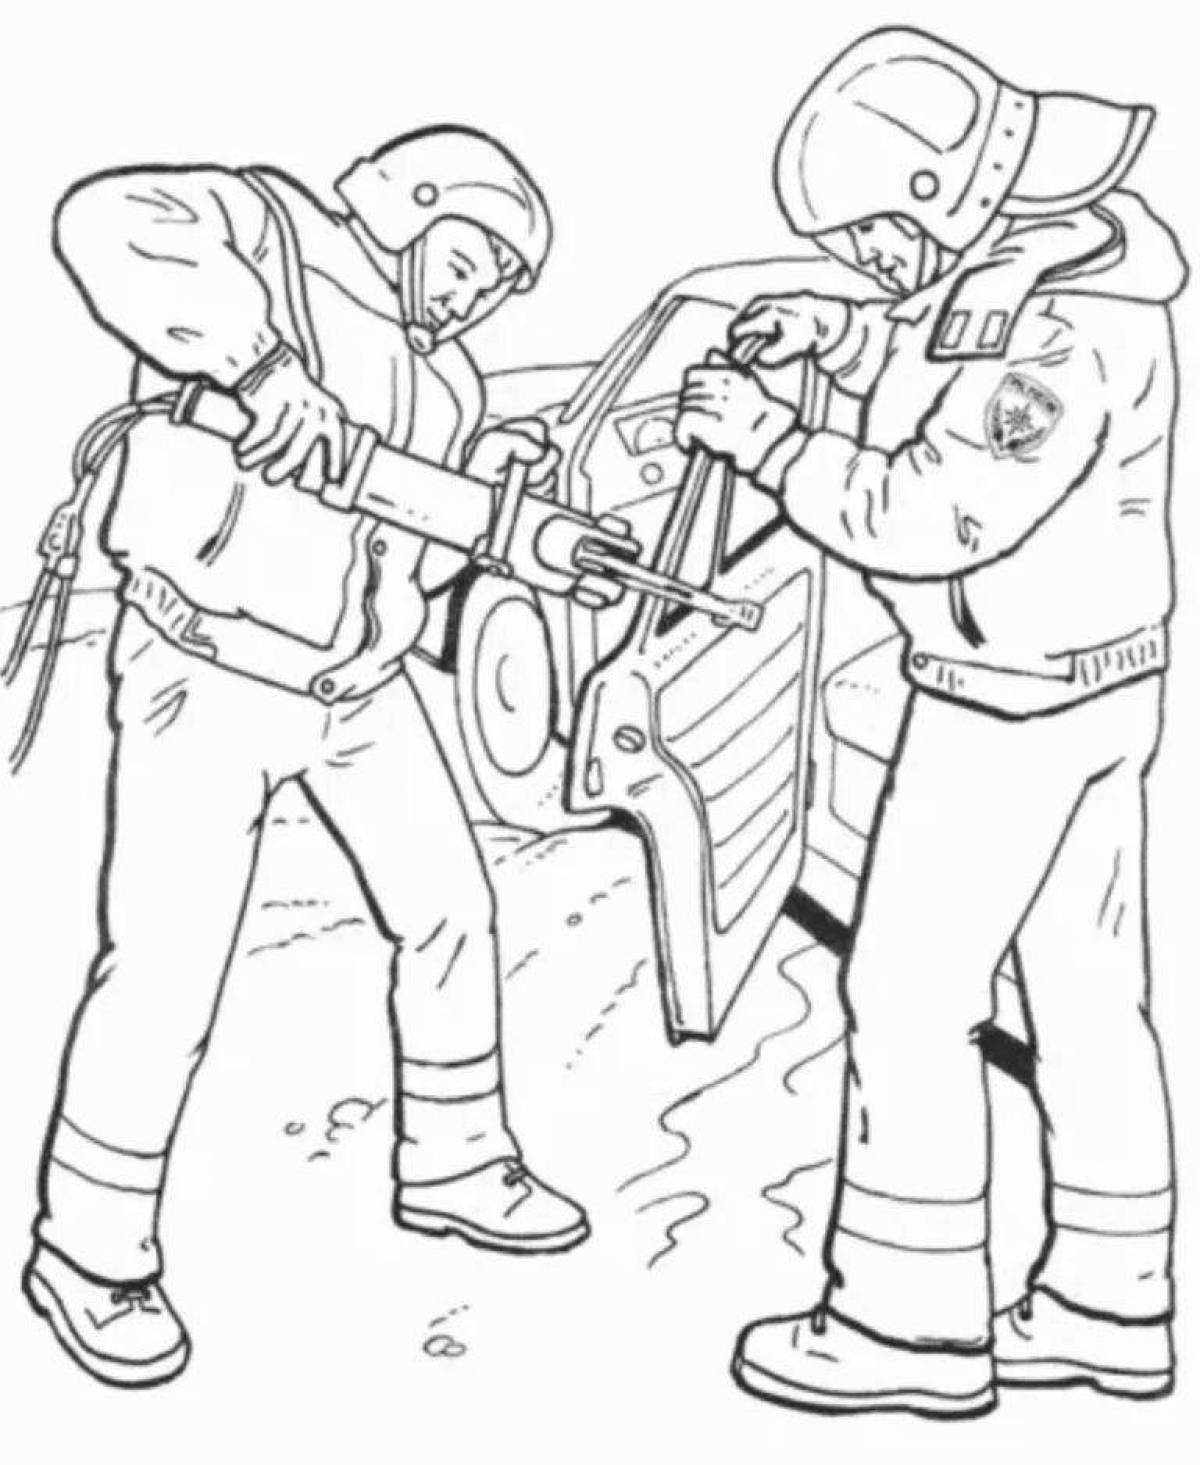 Coloured Rescuers coloring page